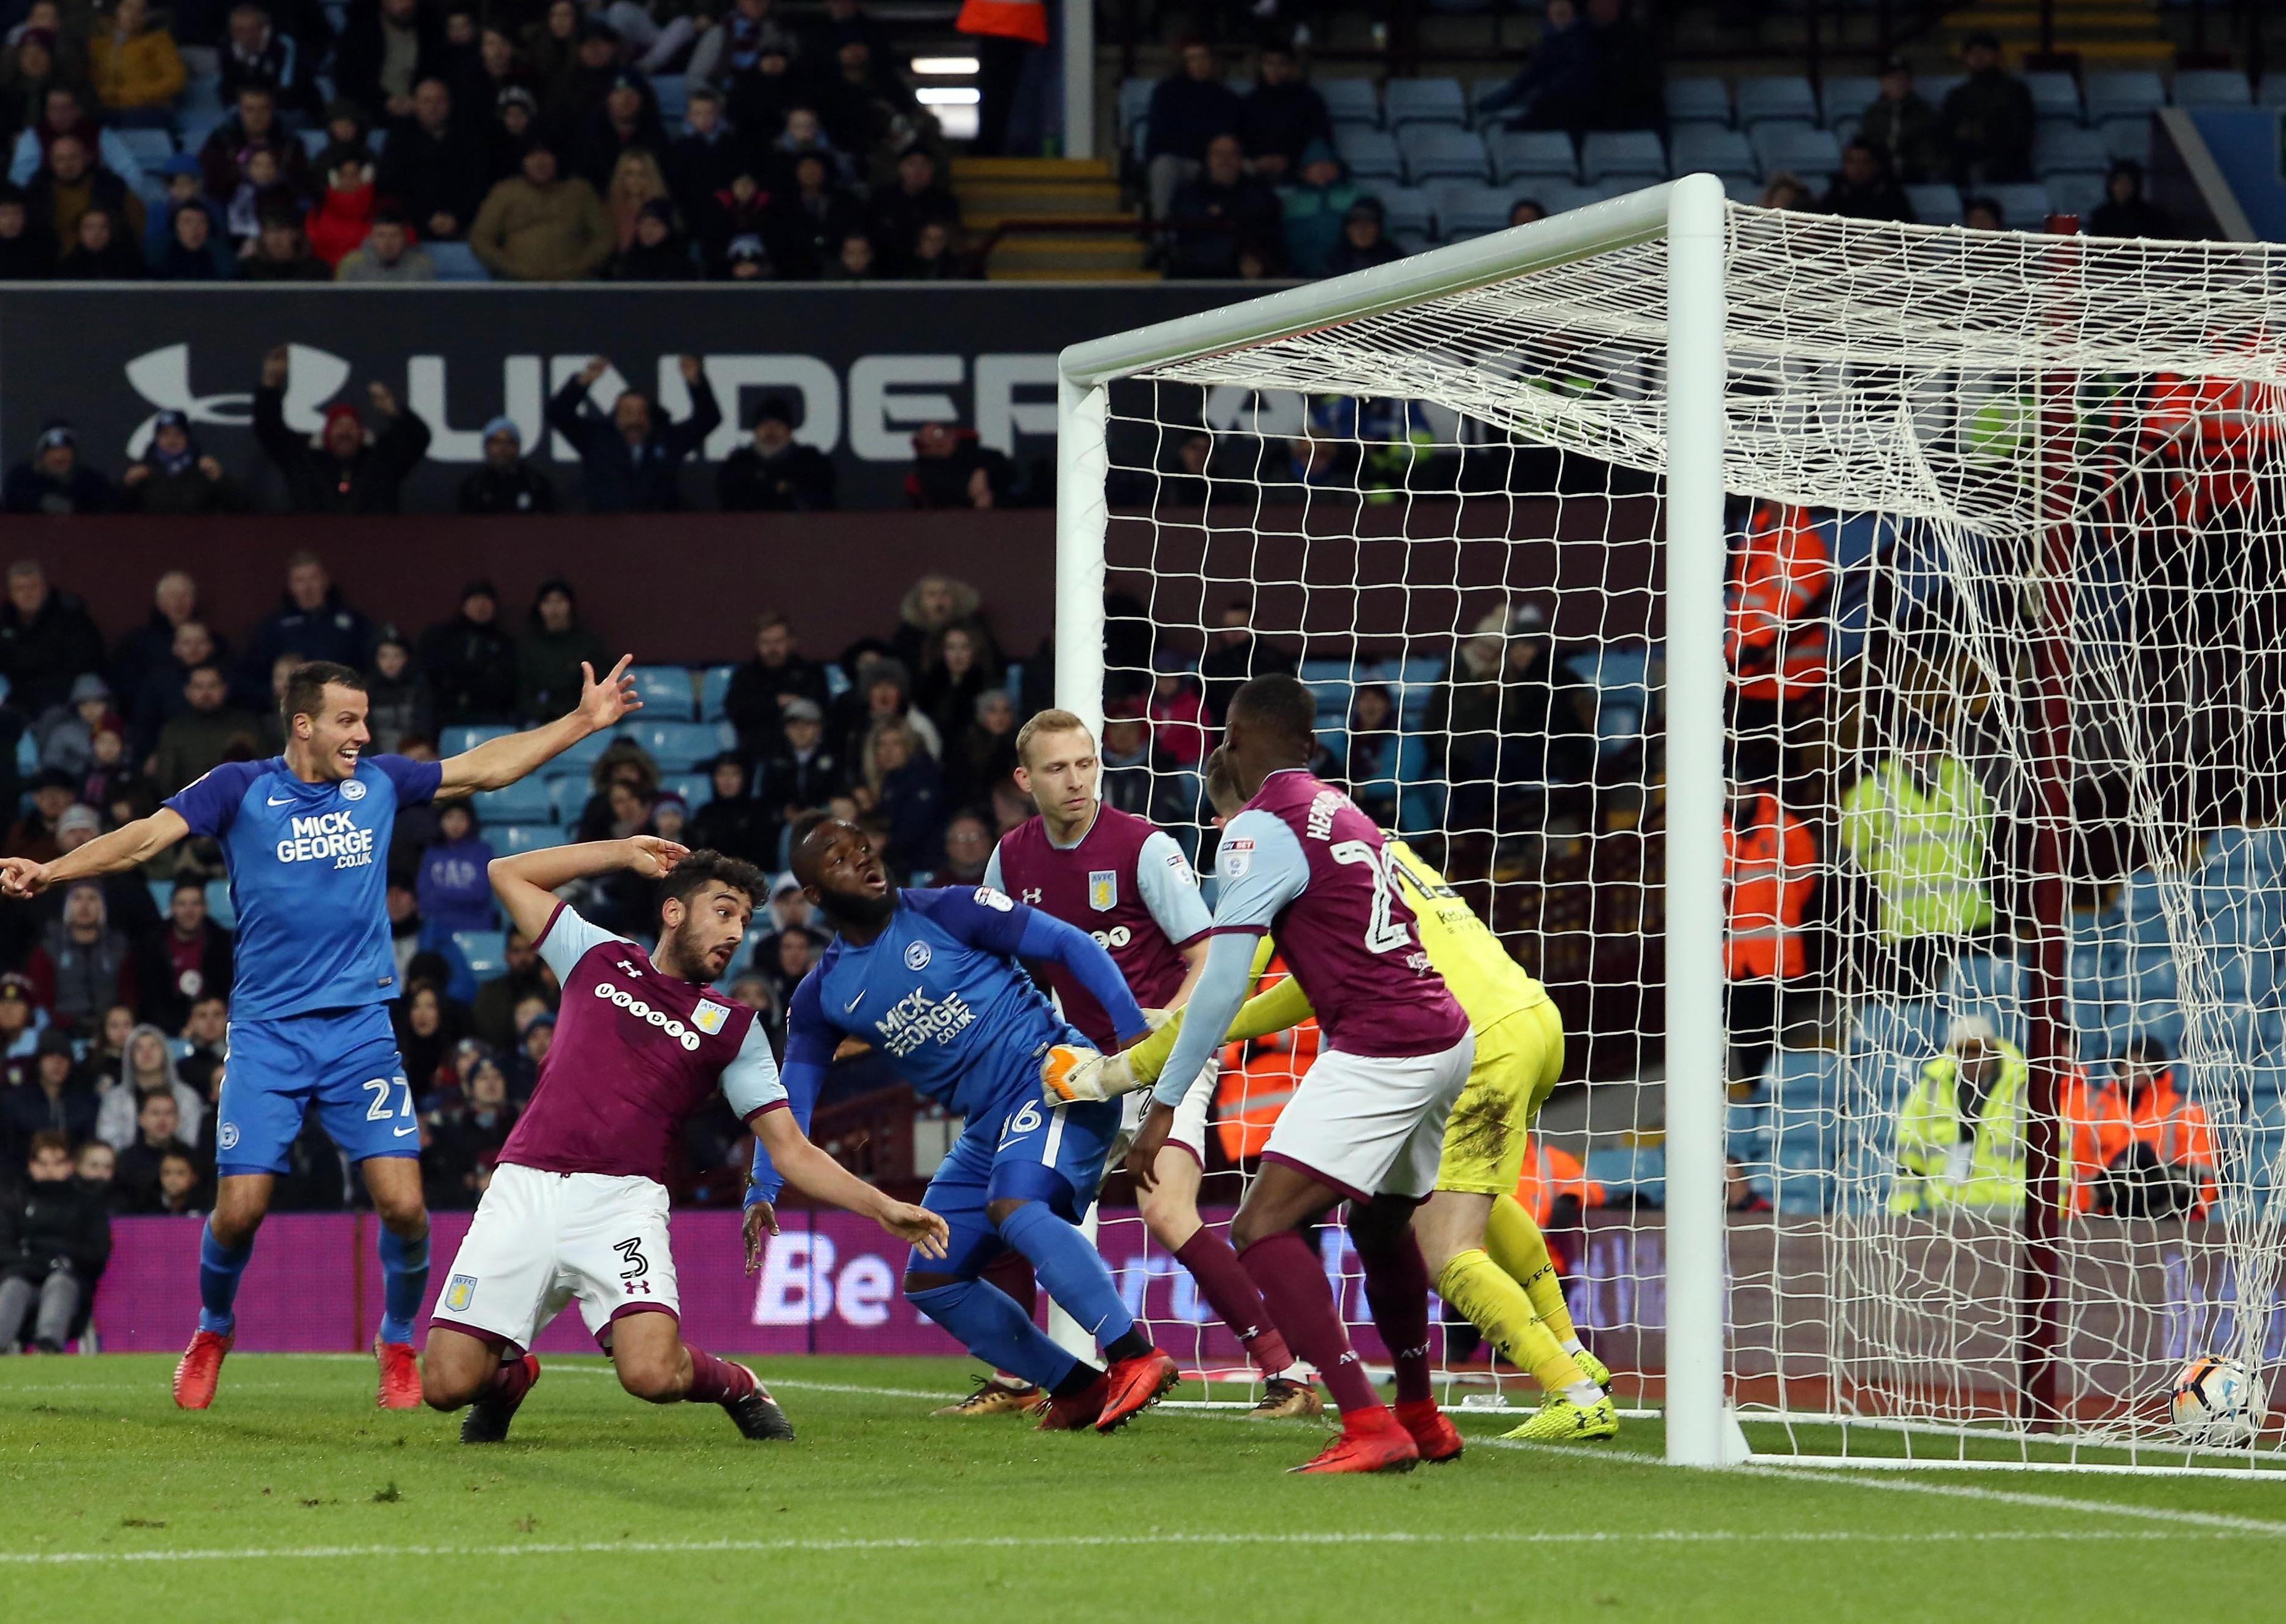 Villa were understrength, but Posh never played better under Grant McCann coming from behind to win 3-1 with goals from Jack Marriott (2) and Ryan Tafazolli.